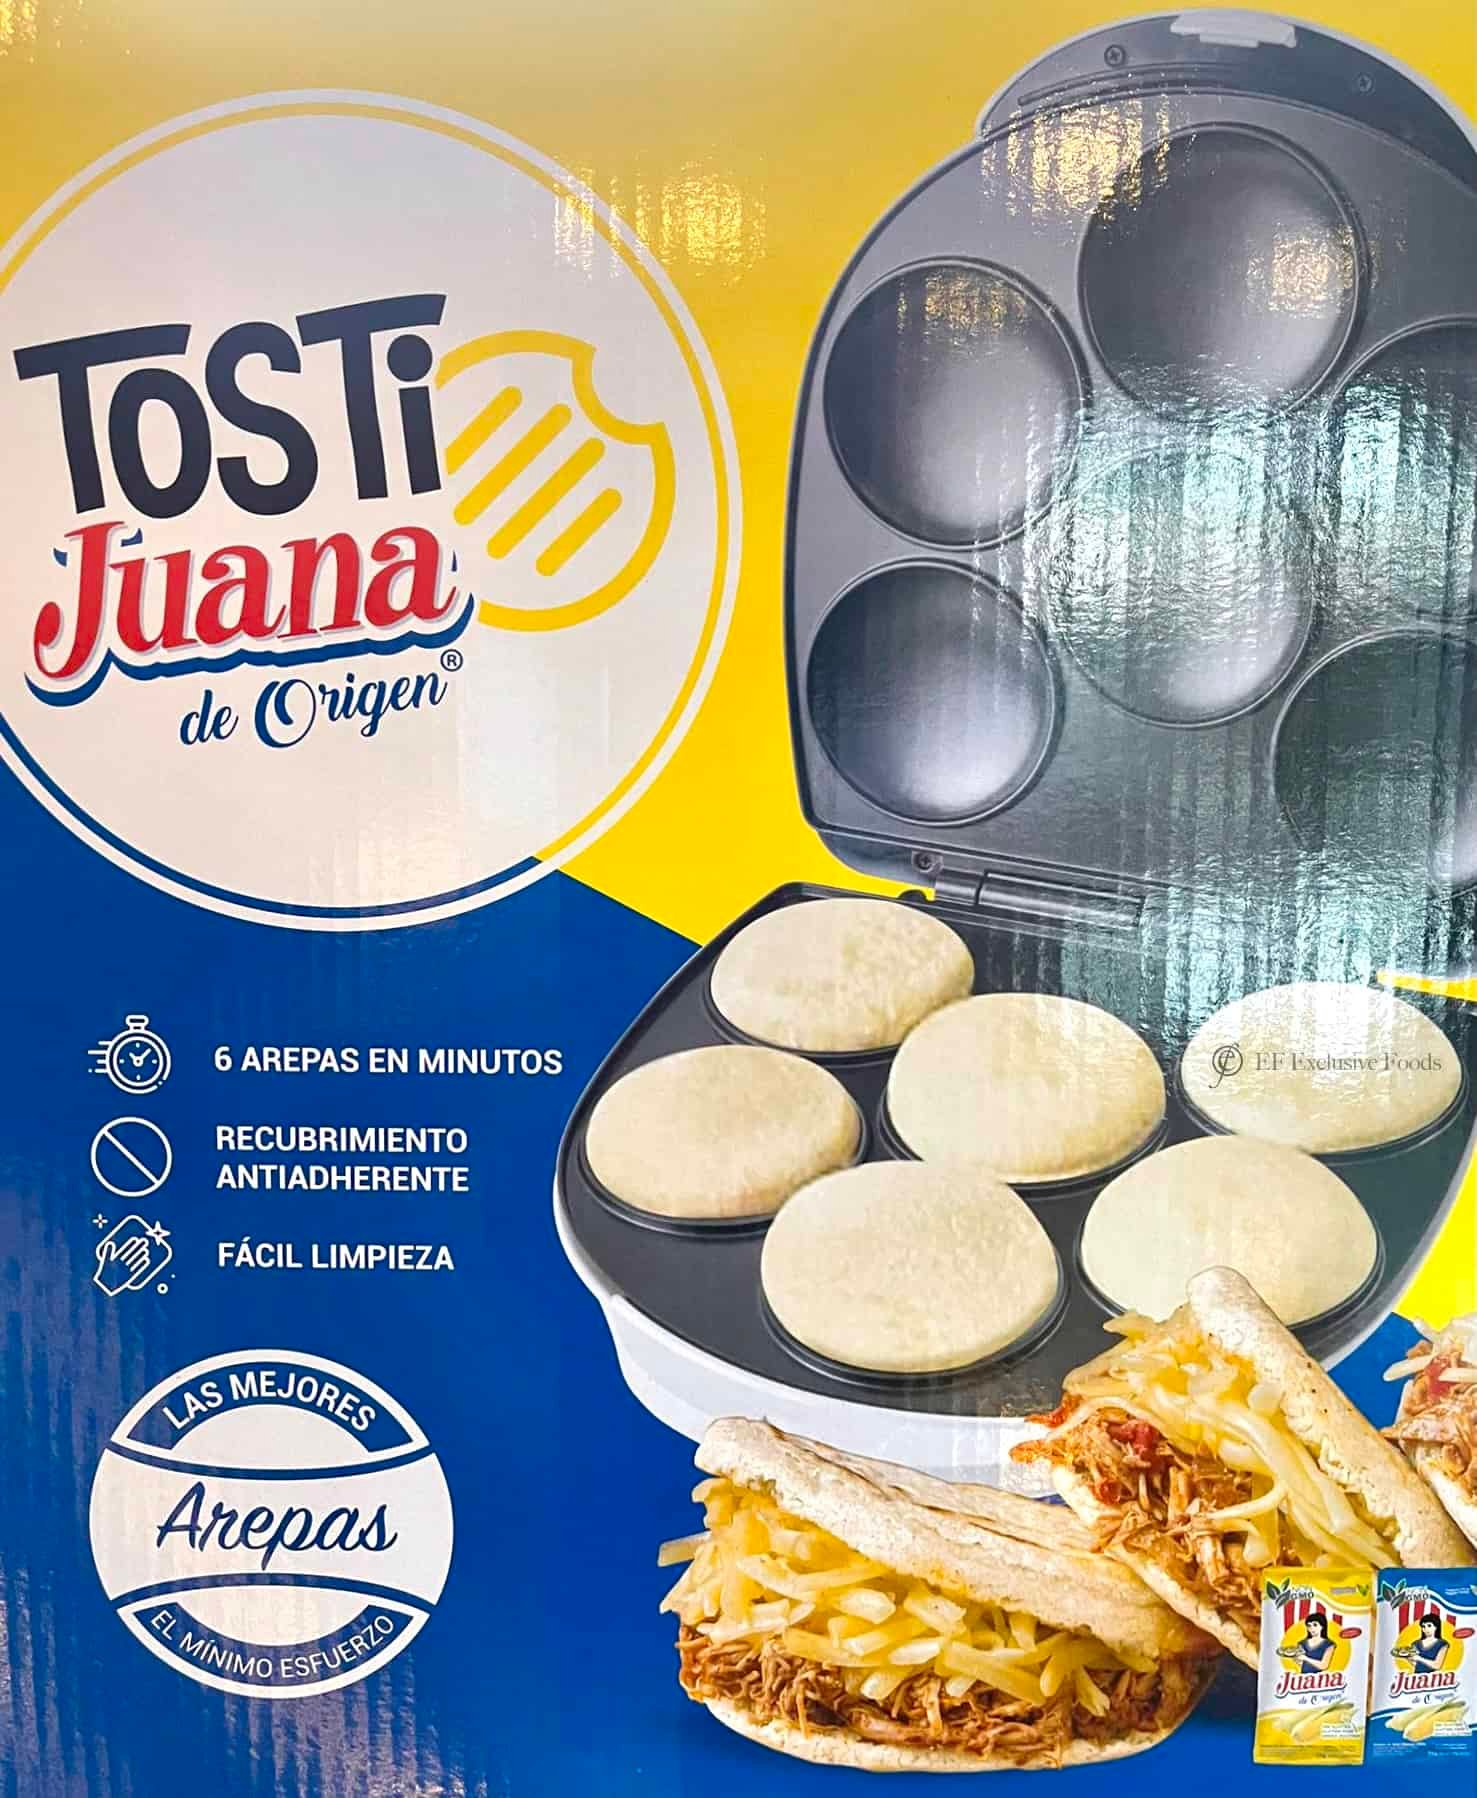 Tosty arepas Oster